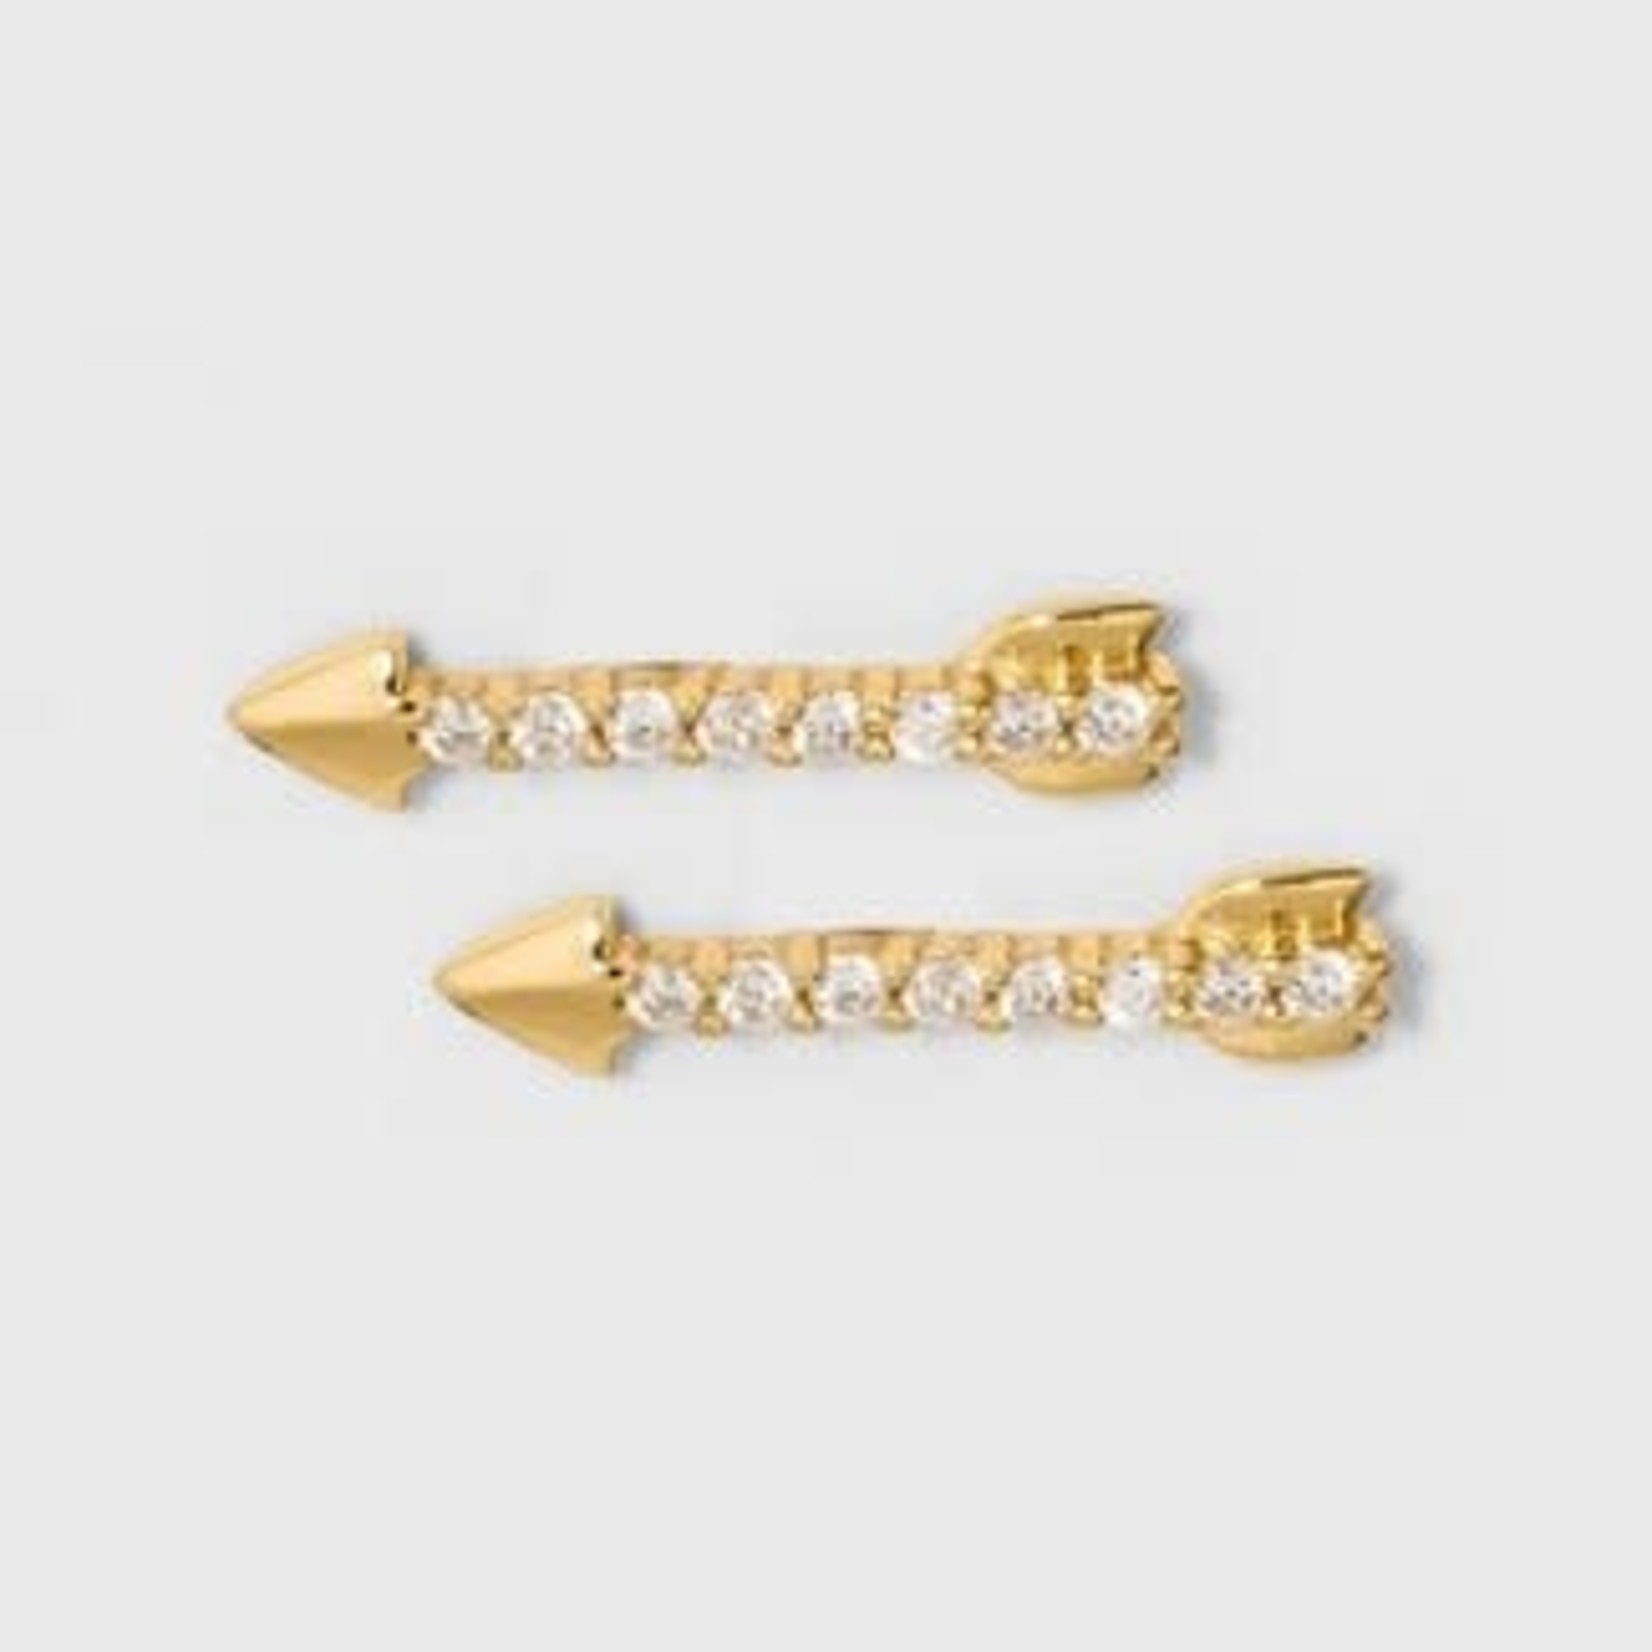 SUGARFIX by BaubleBar 14K Gold Plated Delicate Arrow Stud Earrings - Gold